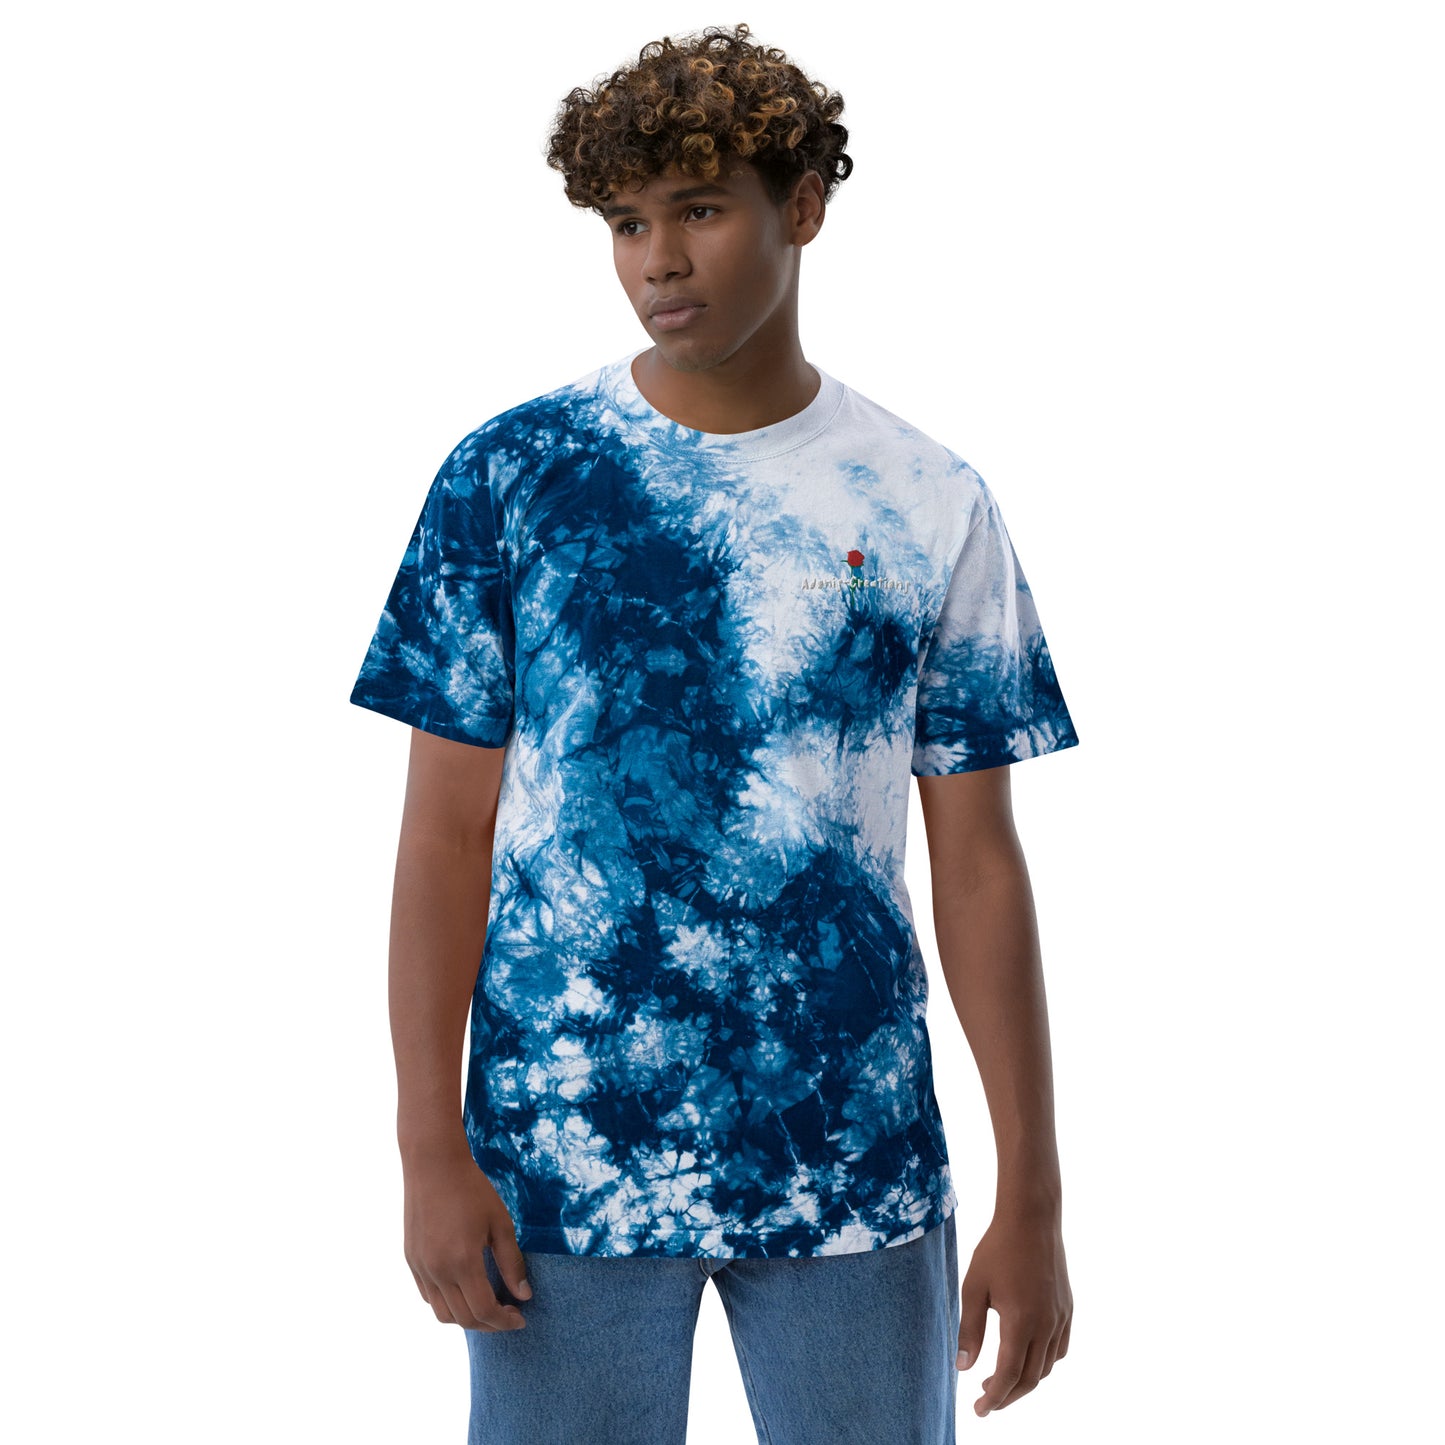 Adonis-Creations - Men's Oversized Embroidered Adonis-Creations Rose T-Shirt